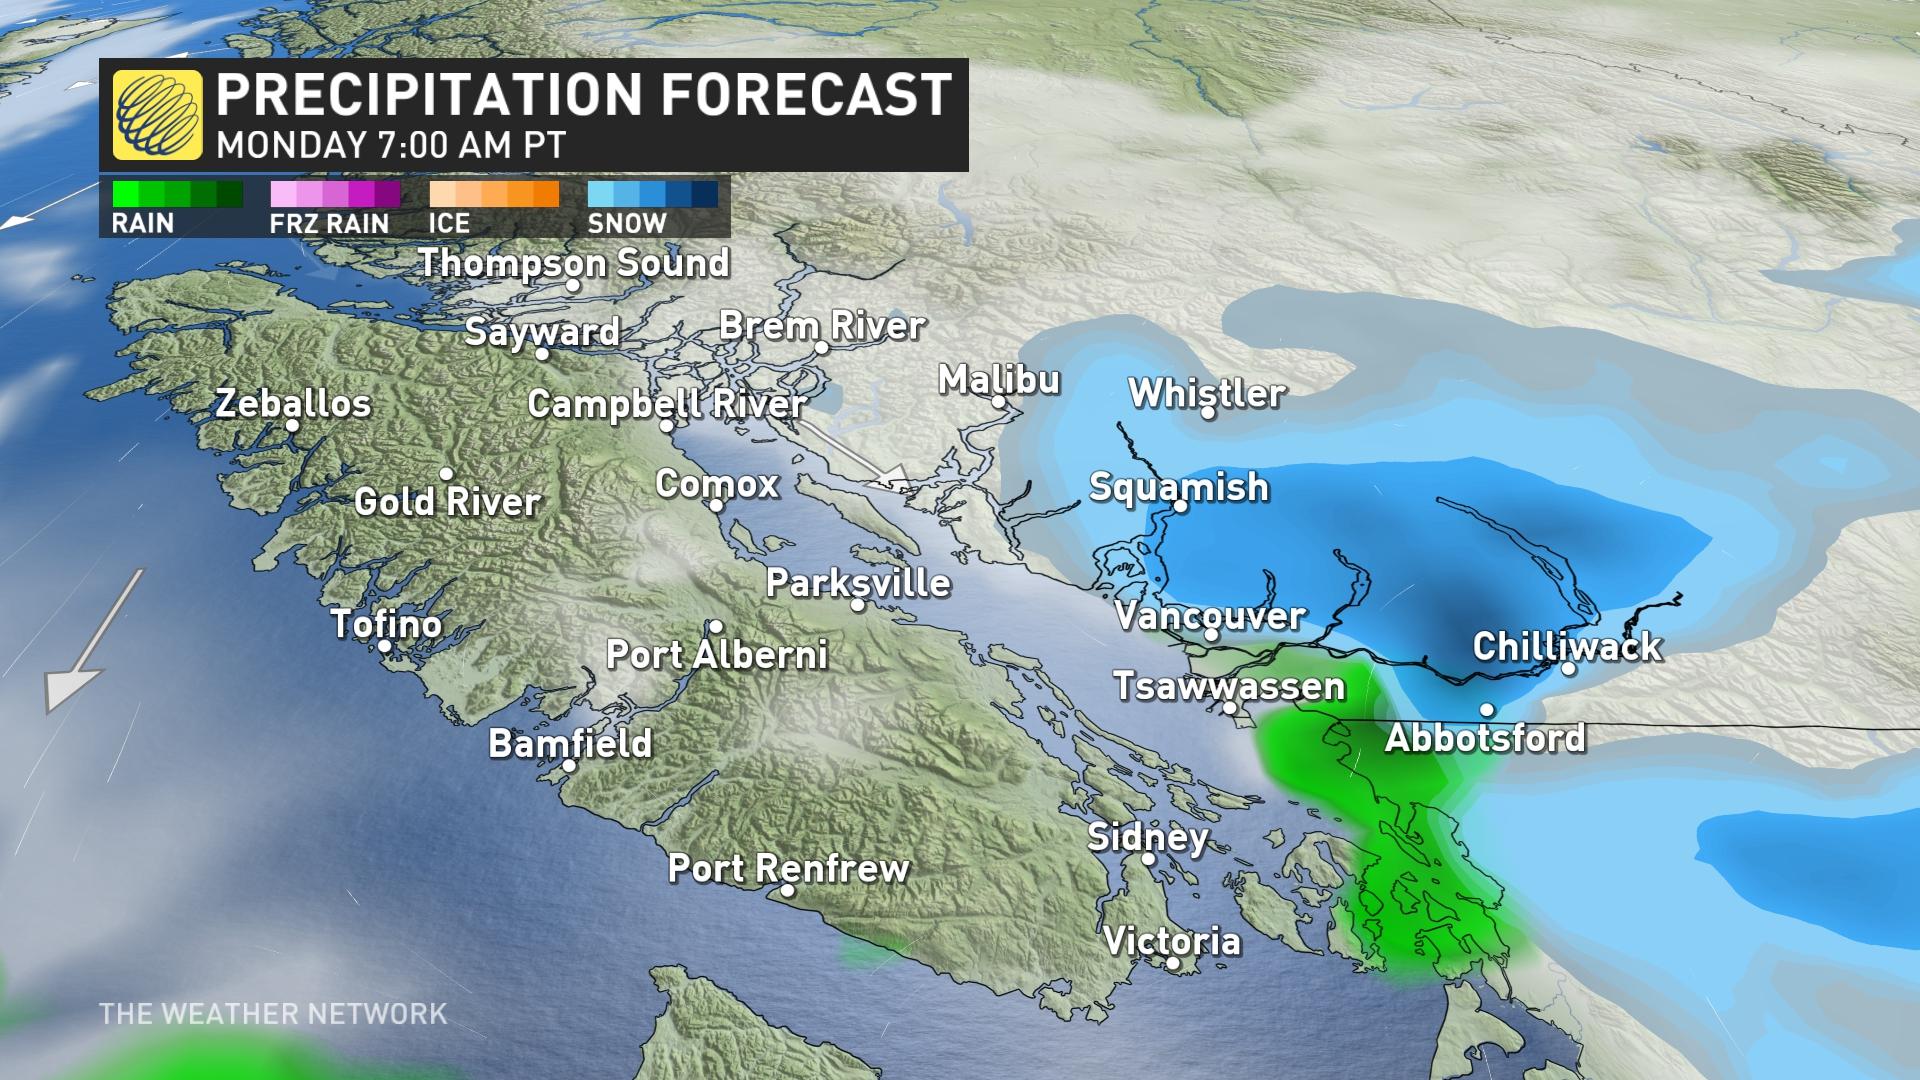 numerous chances of snow infiltrate the b.c. coast as low stays put